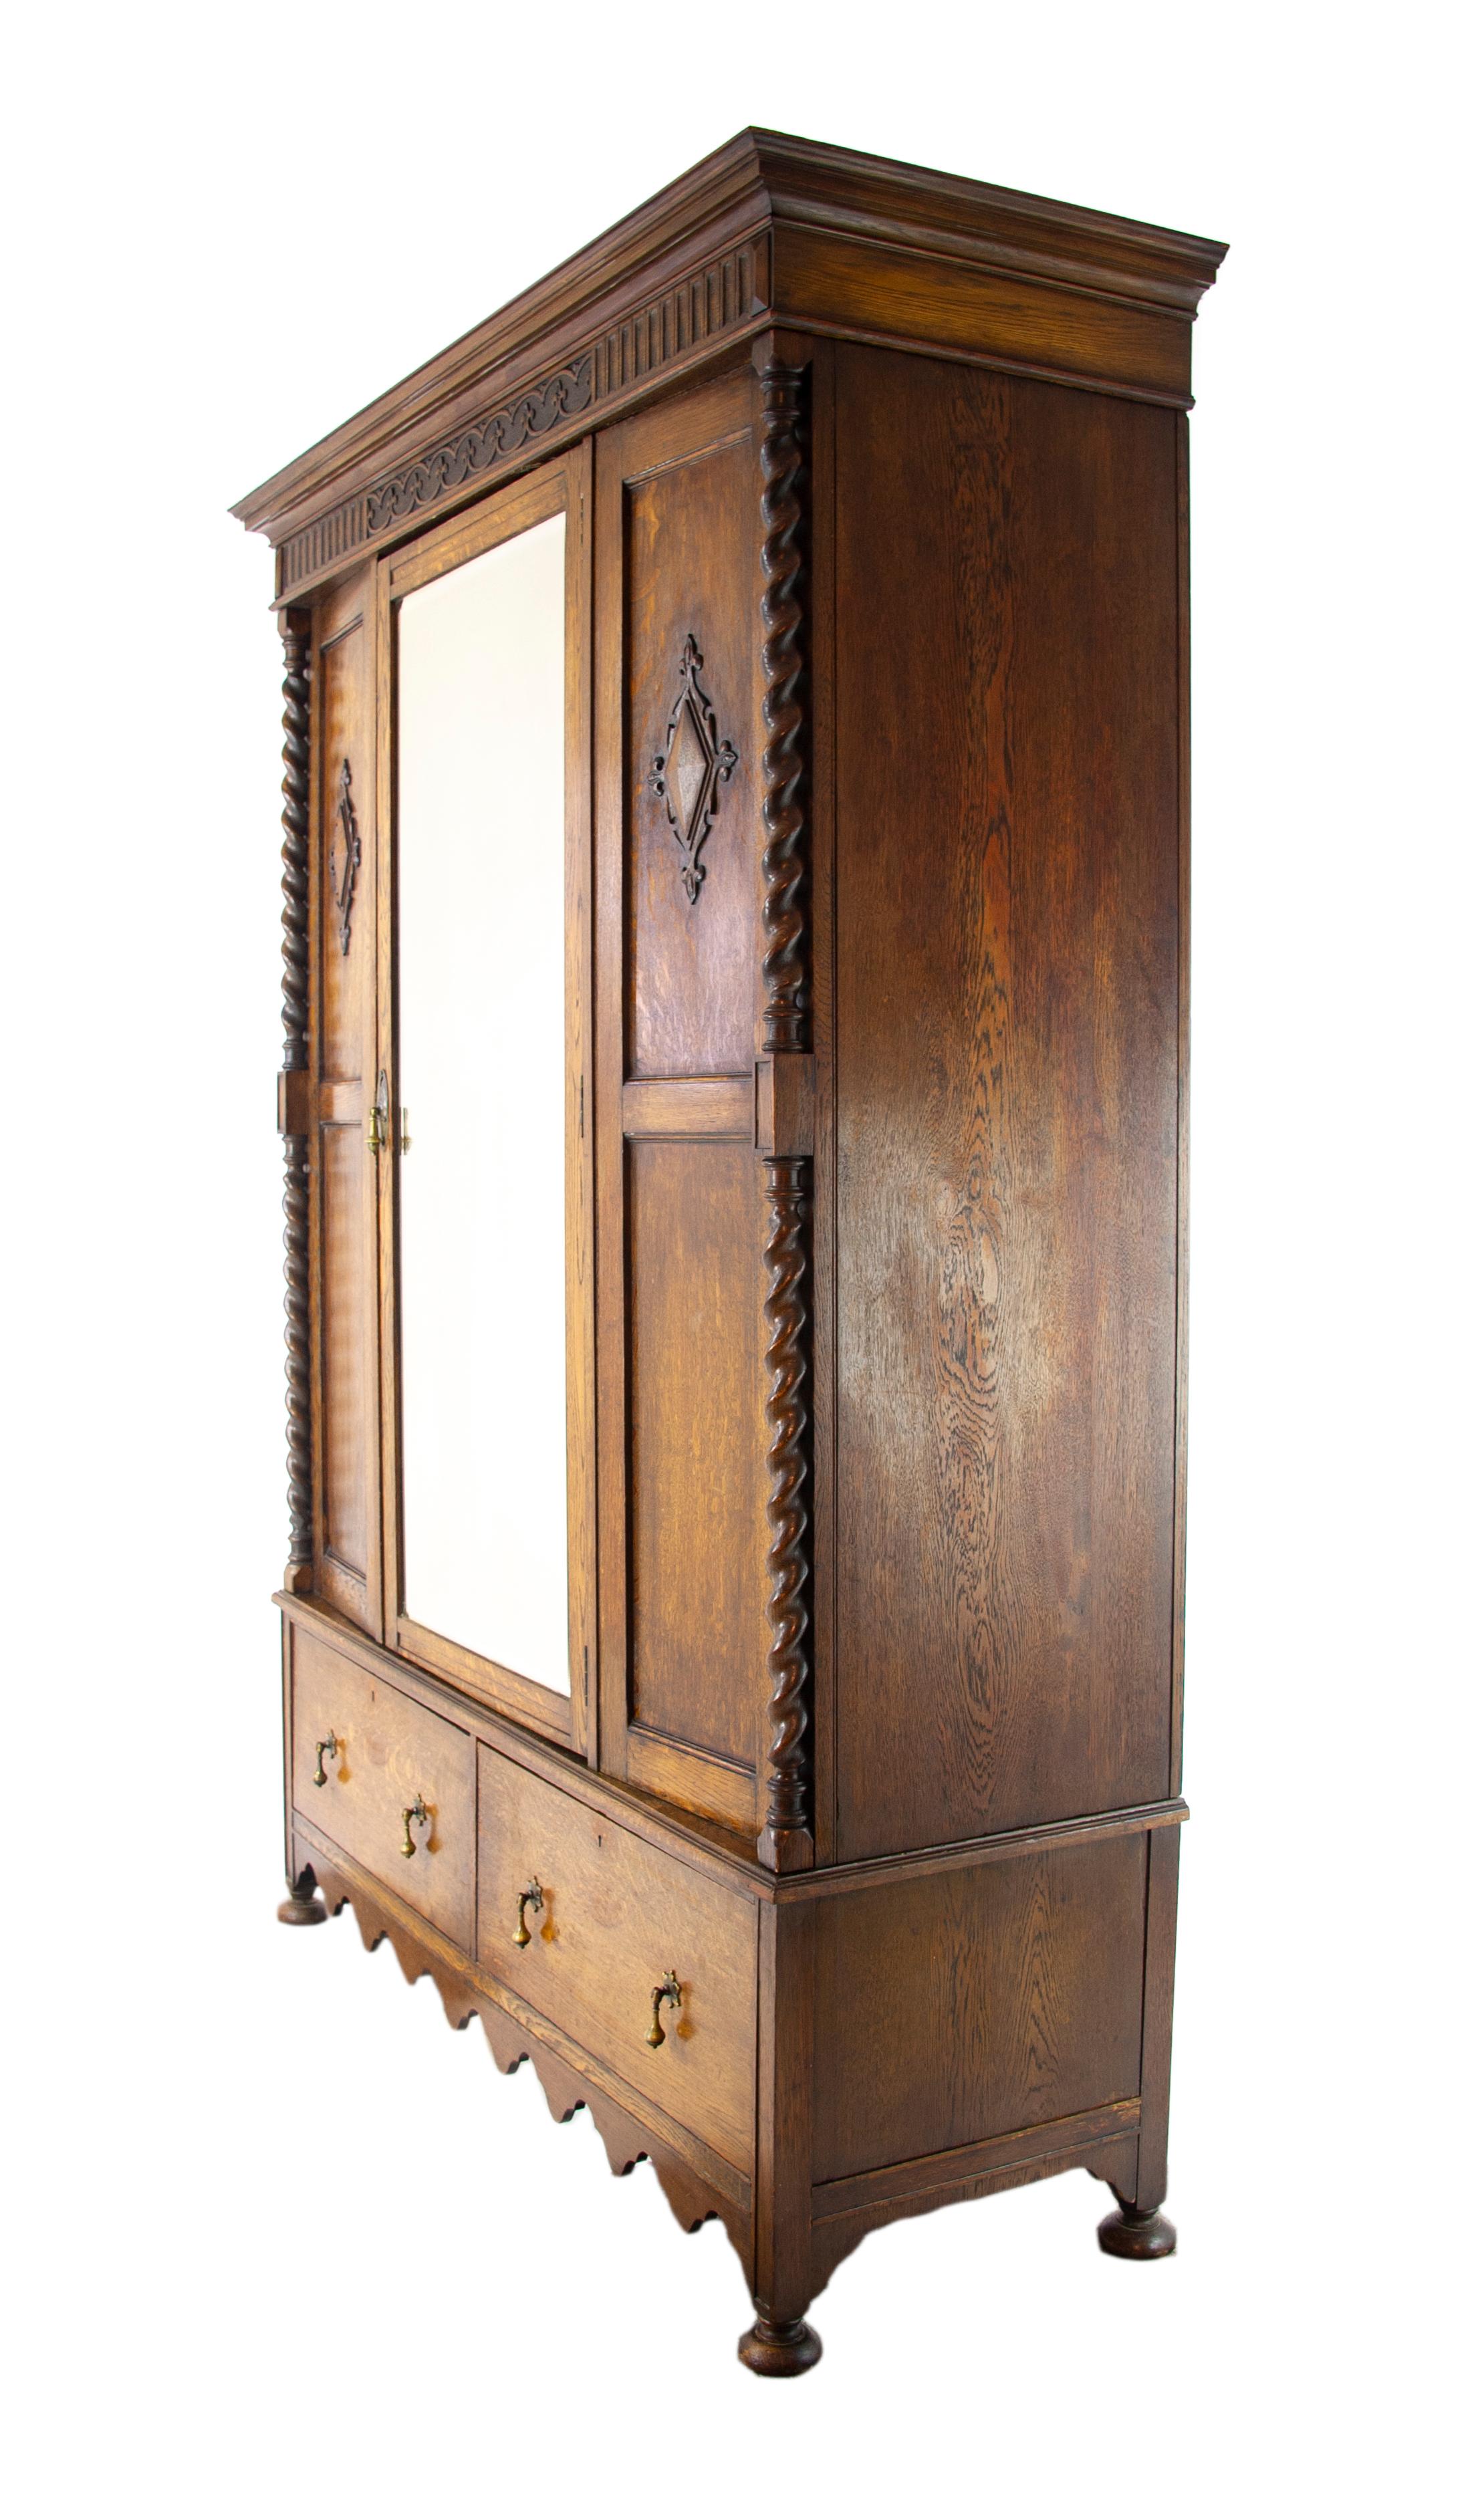 Antique wardrobe, carved oak armoire, barley twist, Scotland, 1910. Antique furniture, B1286

Scotland, 1910
All original condition
Carved cornice above
Single bevelled mirror door below
Flanked by a pair of carved panel sides
Thick barley twist